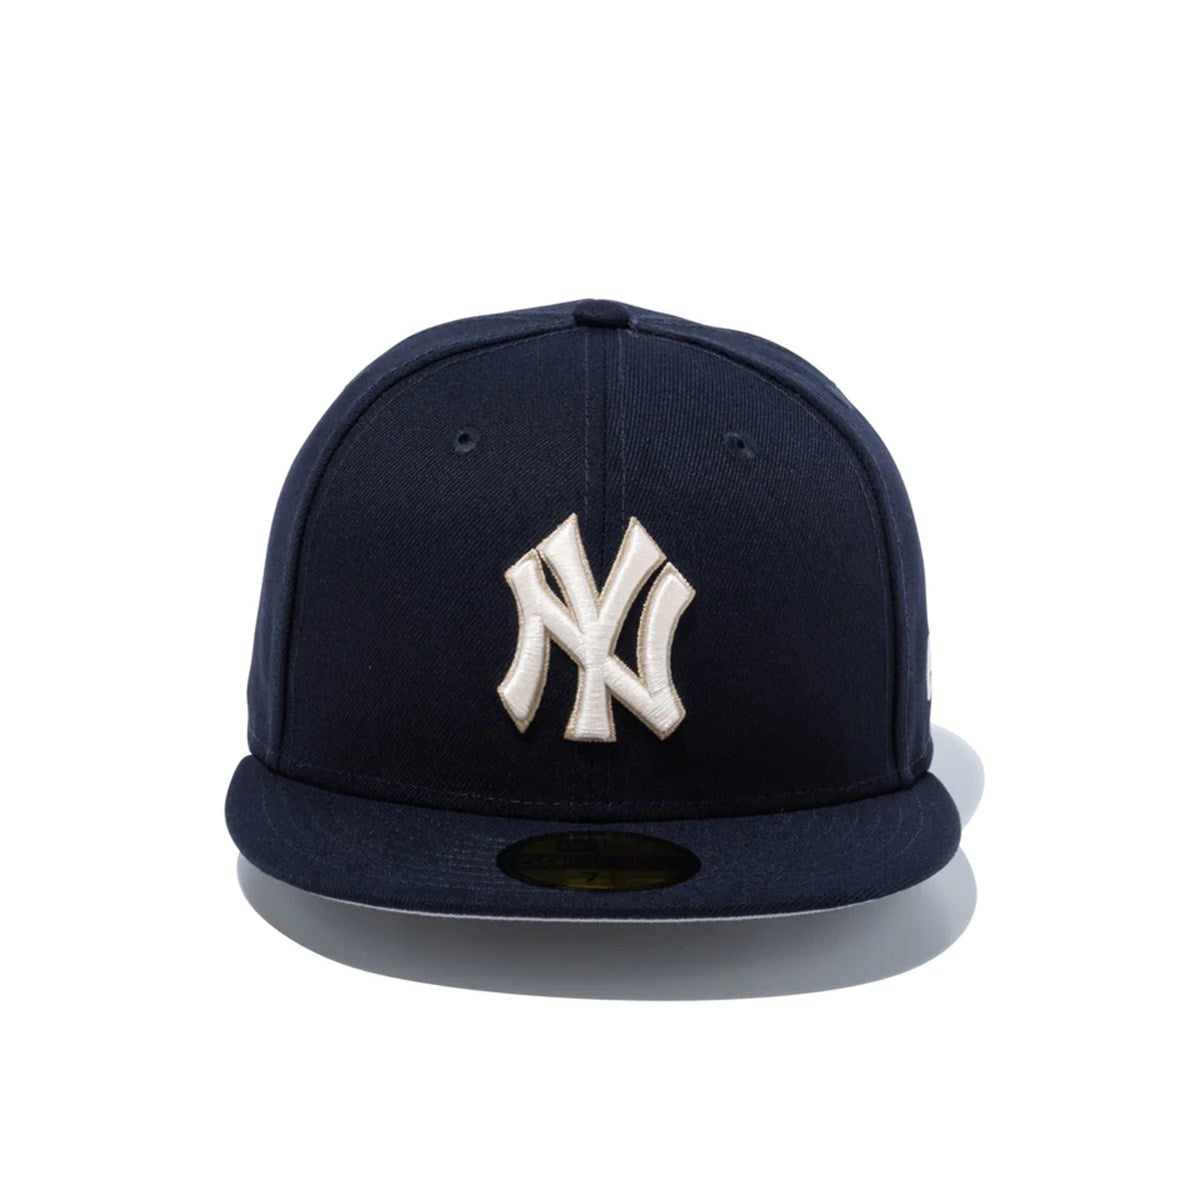 NEW ERA New York Yankees - 59FIFTY Vintage Color NVY【14174580】